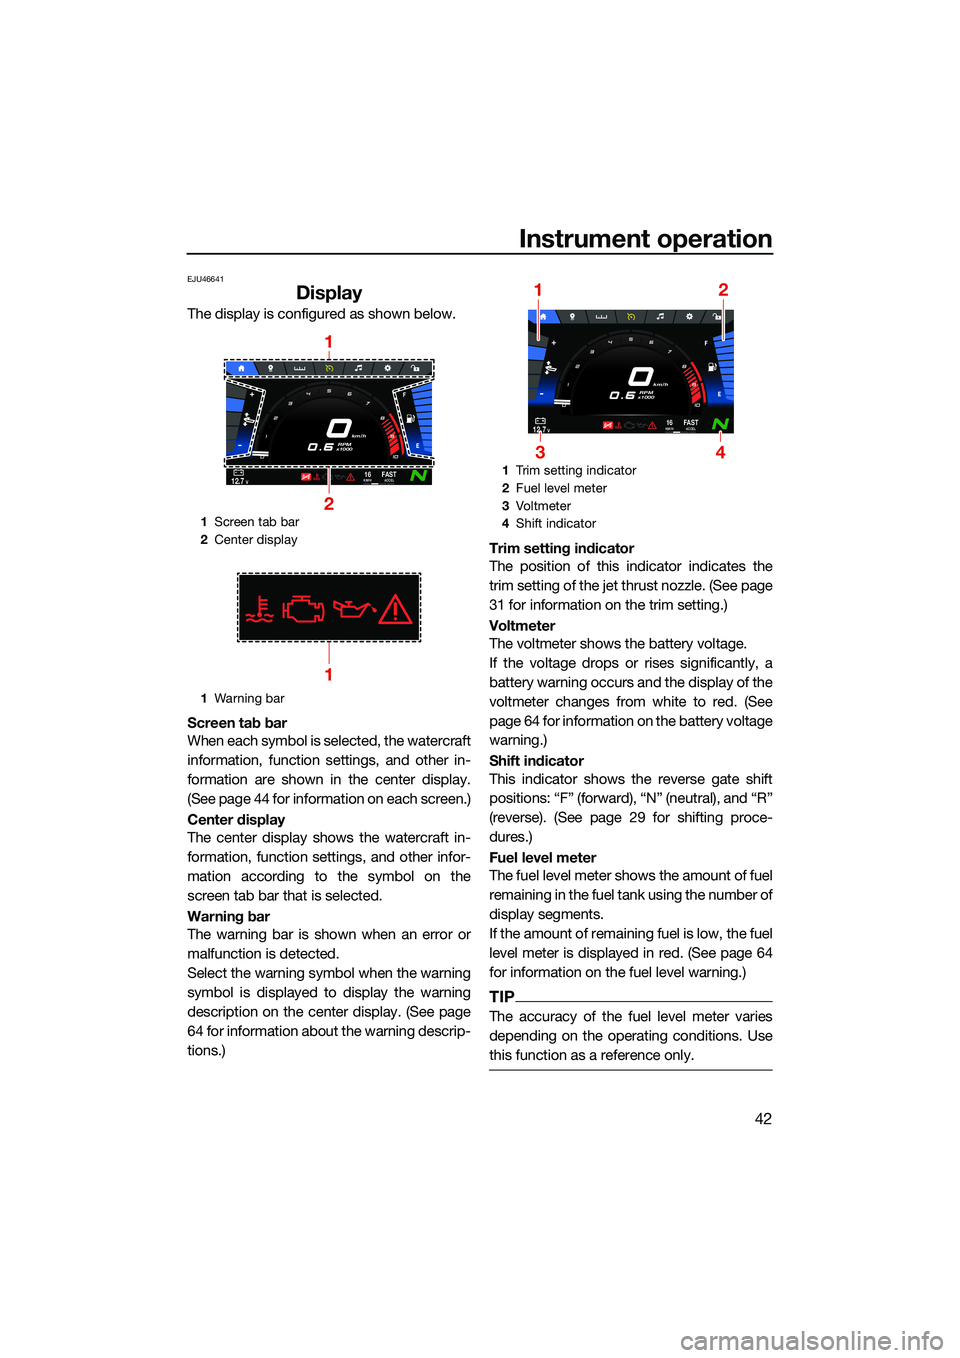 YAMAHA FX SVHO 2022  Owners Manual Instrument operation
42
EJU46641
Display
The display is configured as shown below.
Screen tab bar
When each symbol is selected, the watercraft
information, function settings, and other in-
formation a